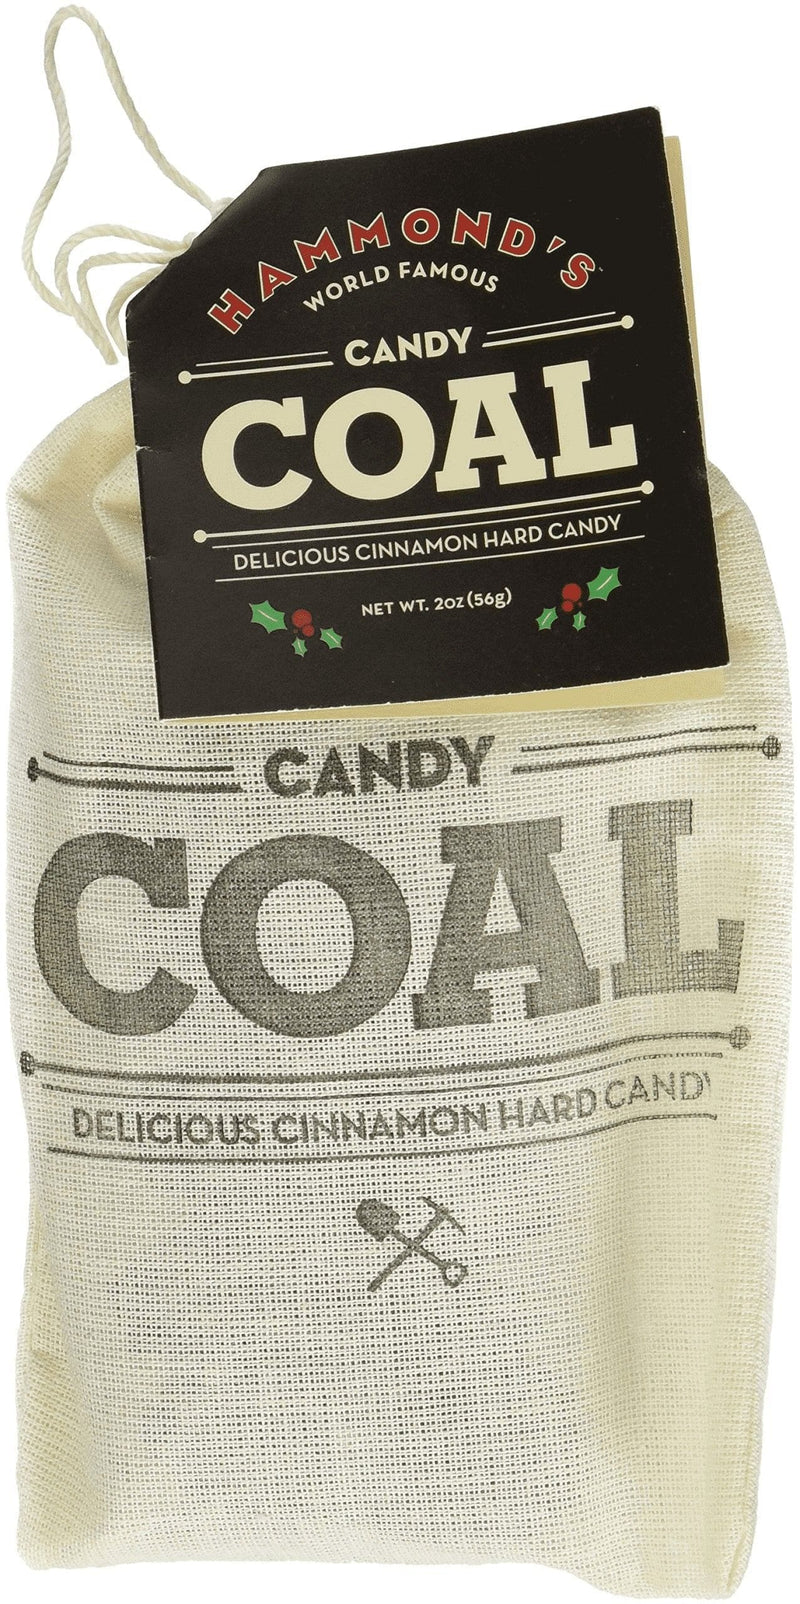 Pull String Bag of Coal (candy) - Shelburne Country Store